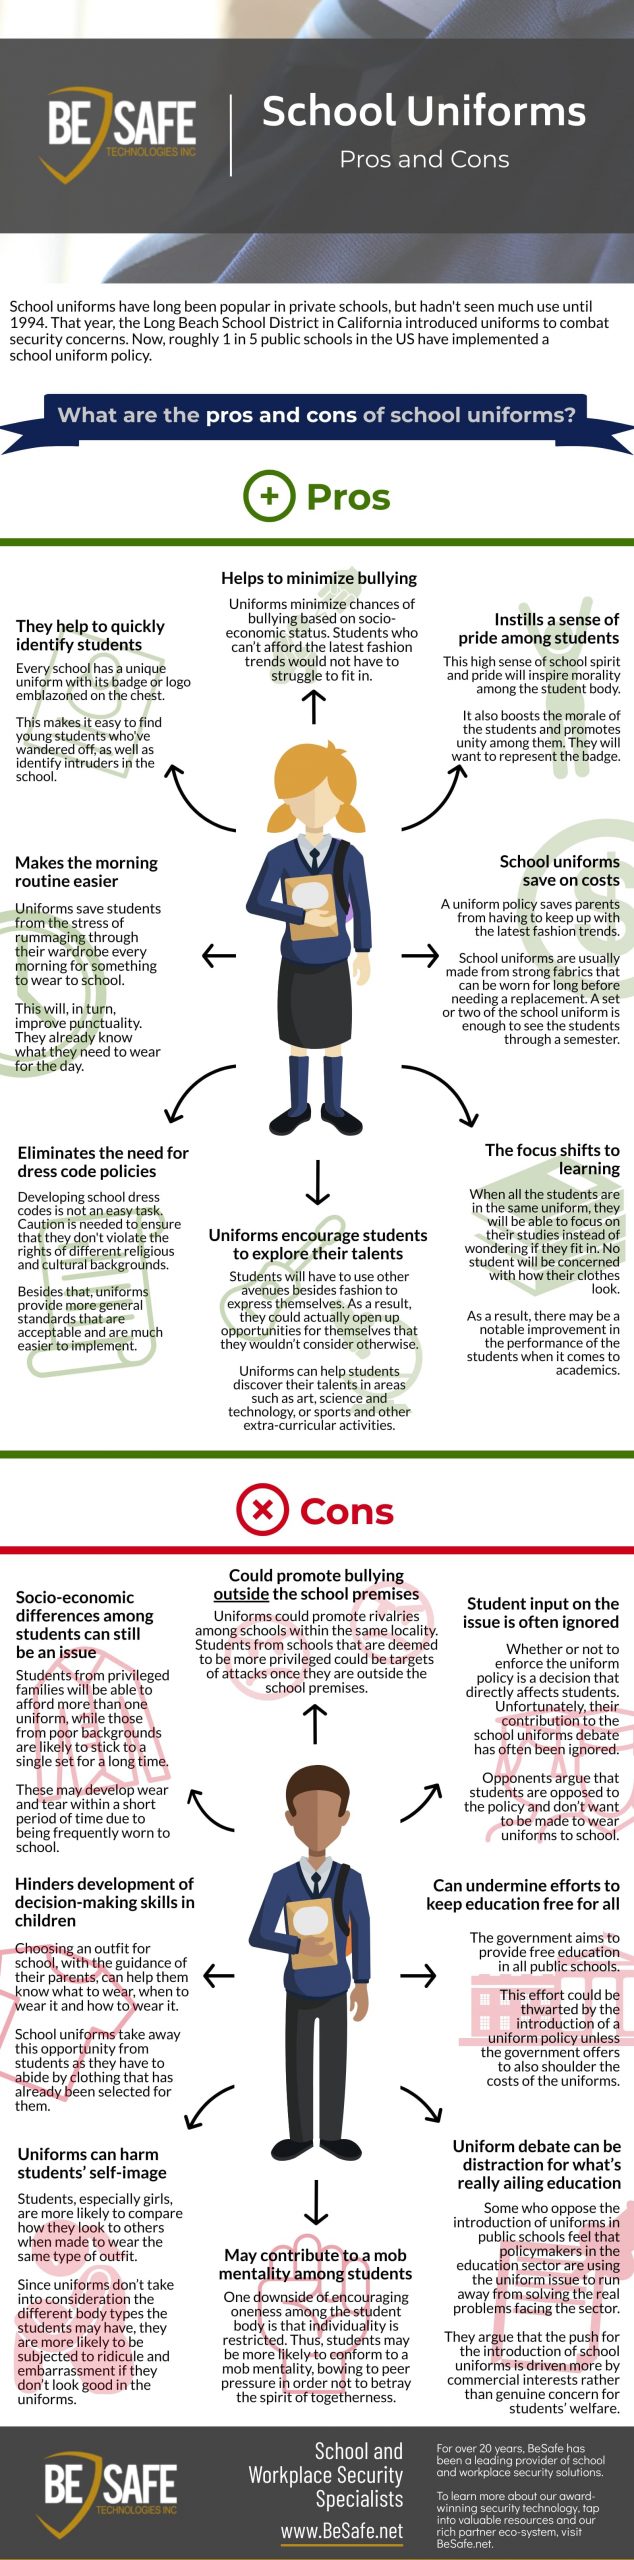 essay on school uniforms pros and cons